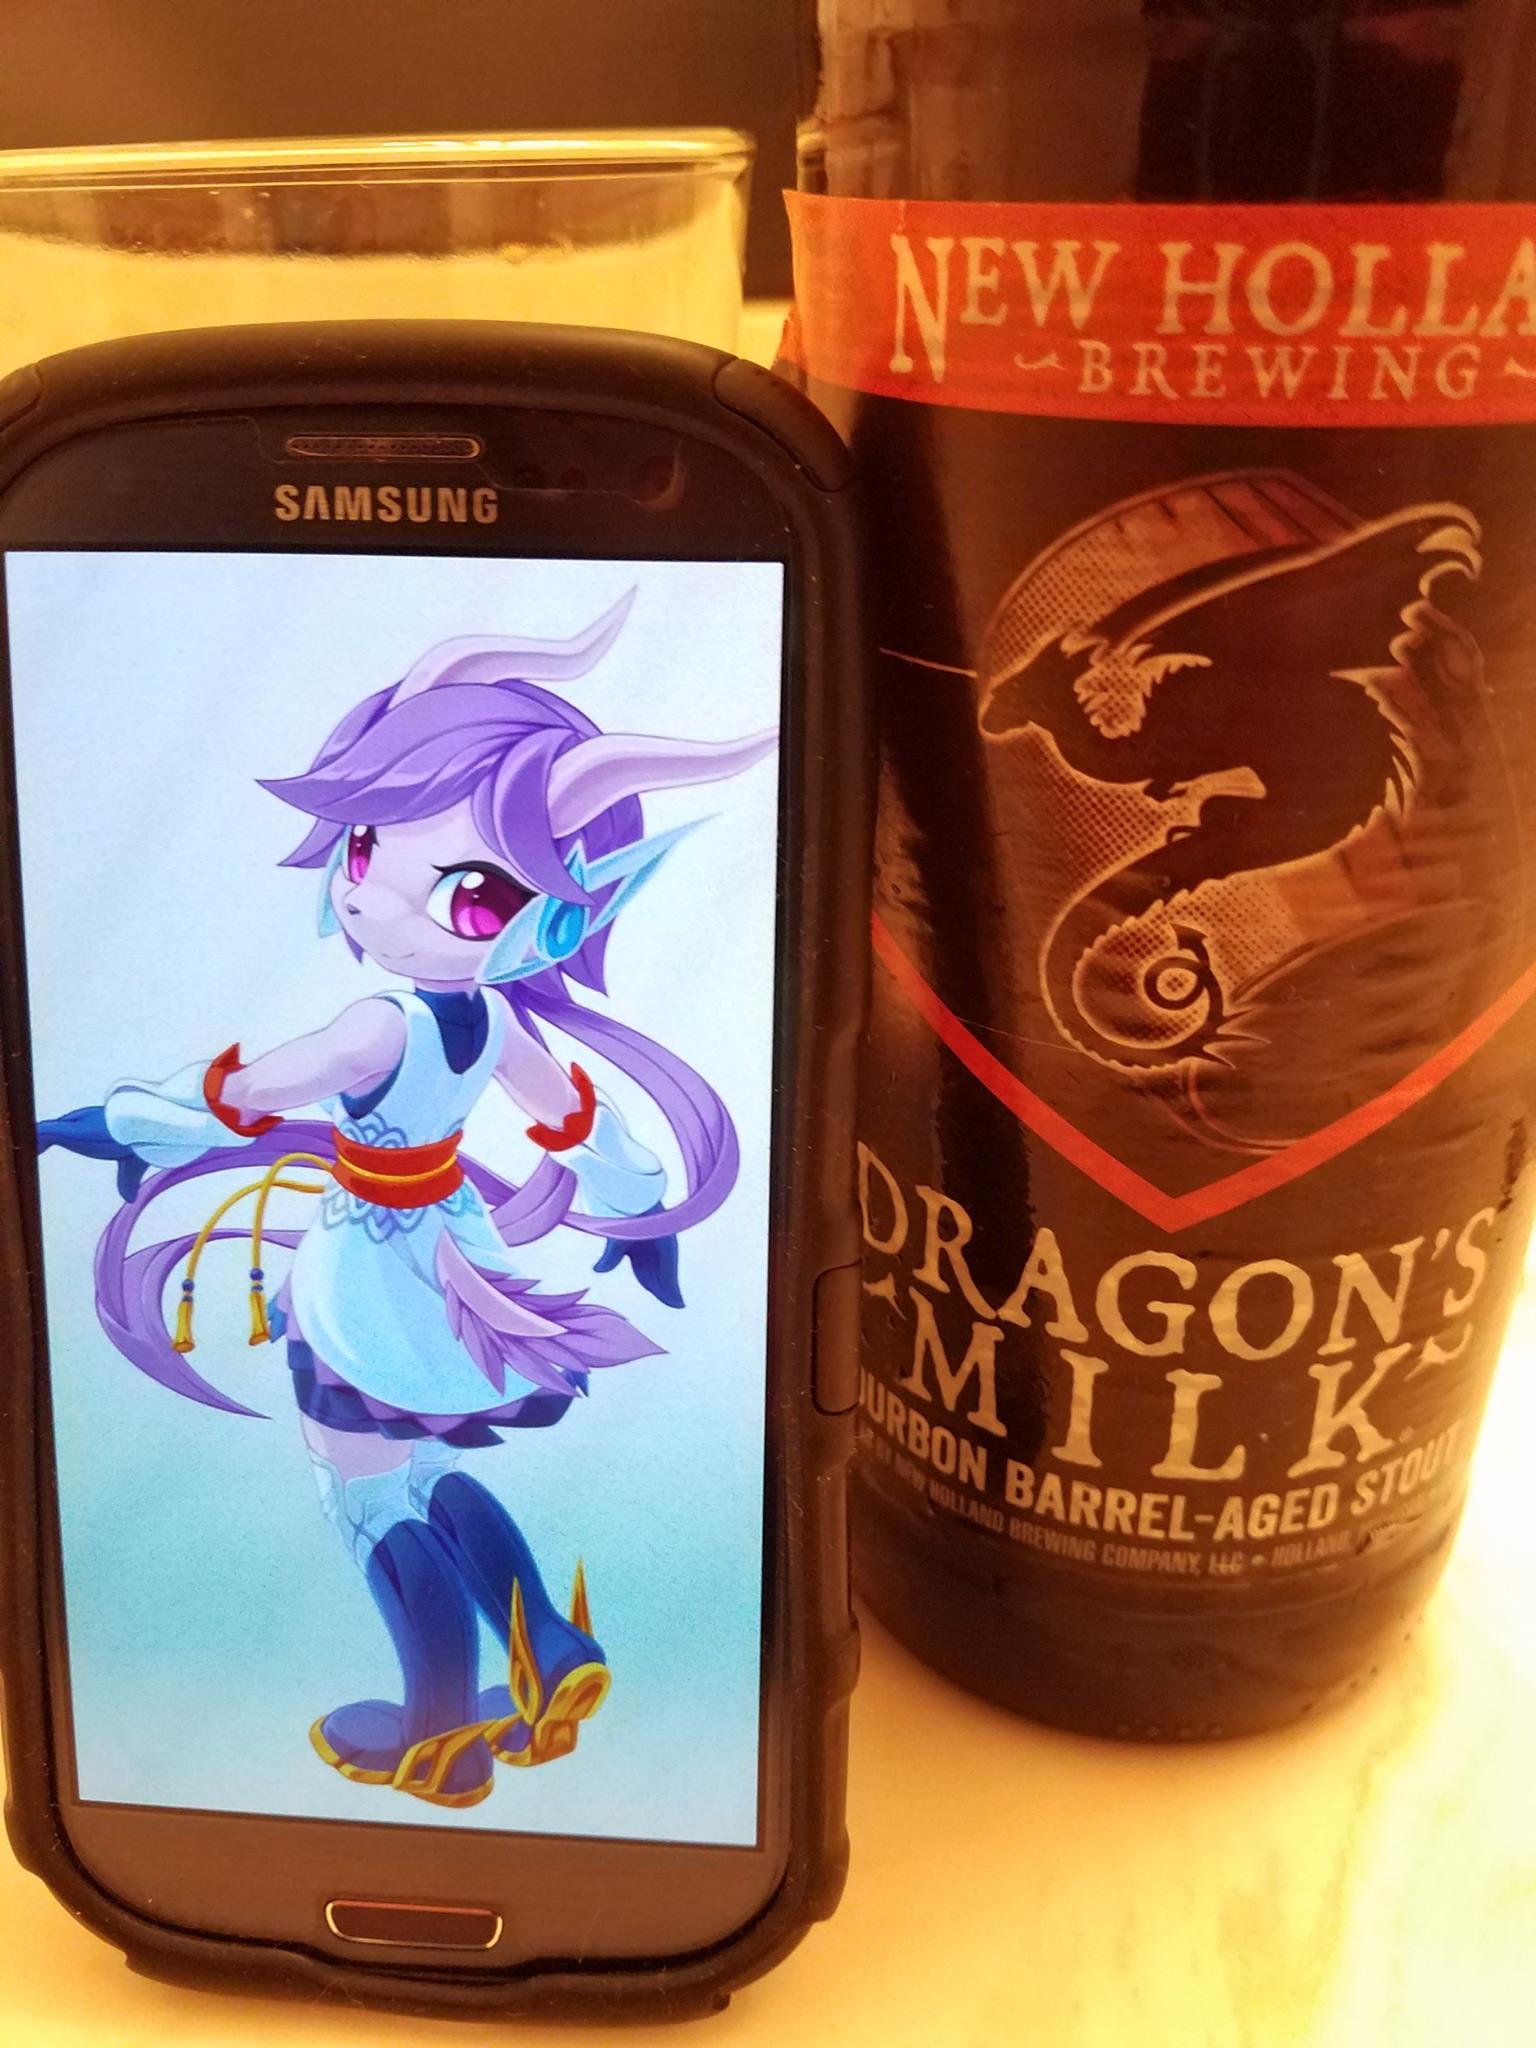 Dragon S Milk Brewerianimelogs Anime And Beer Lore